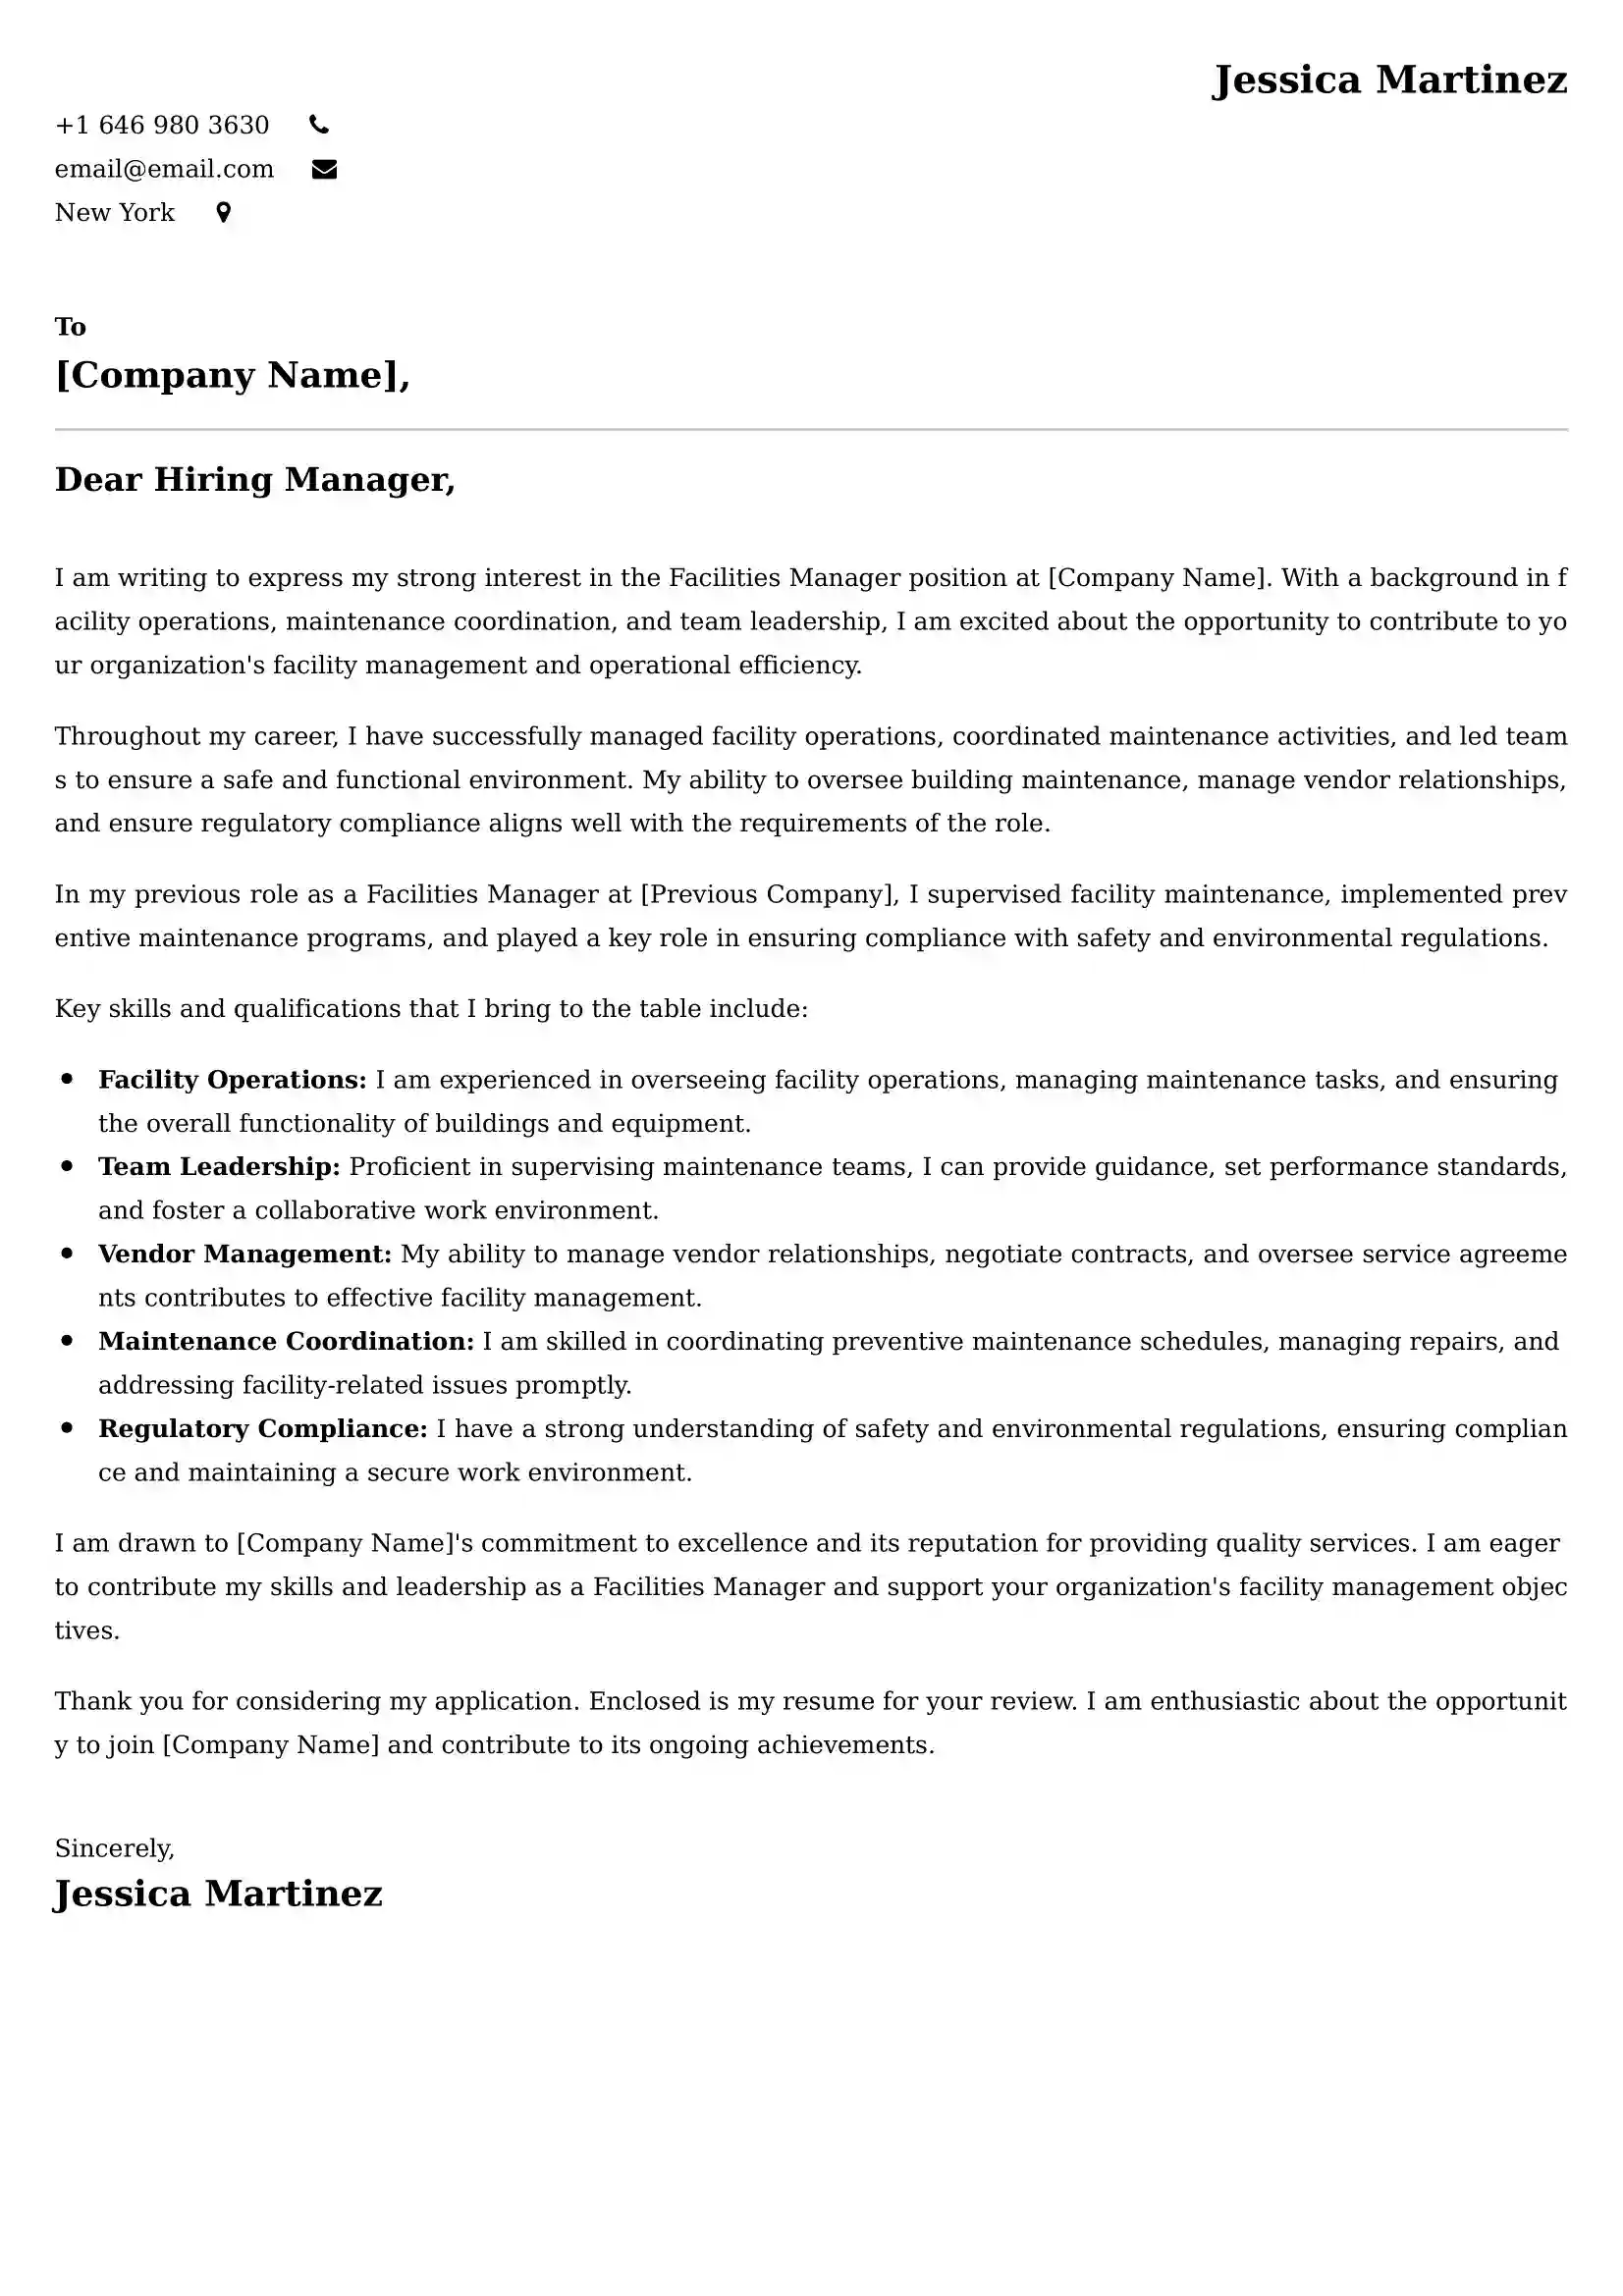 Facilities Manager Cover Letter Examples -Latest Brazilian Templates